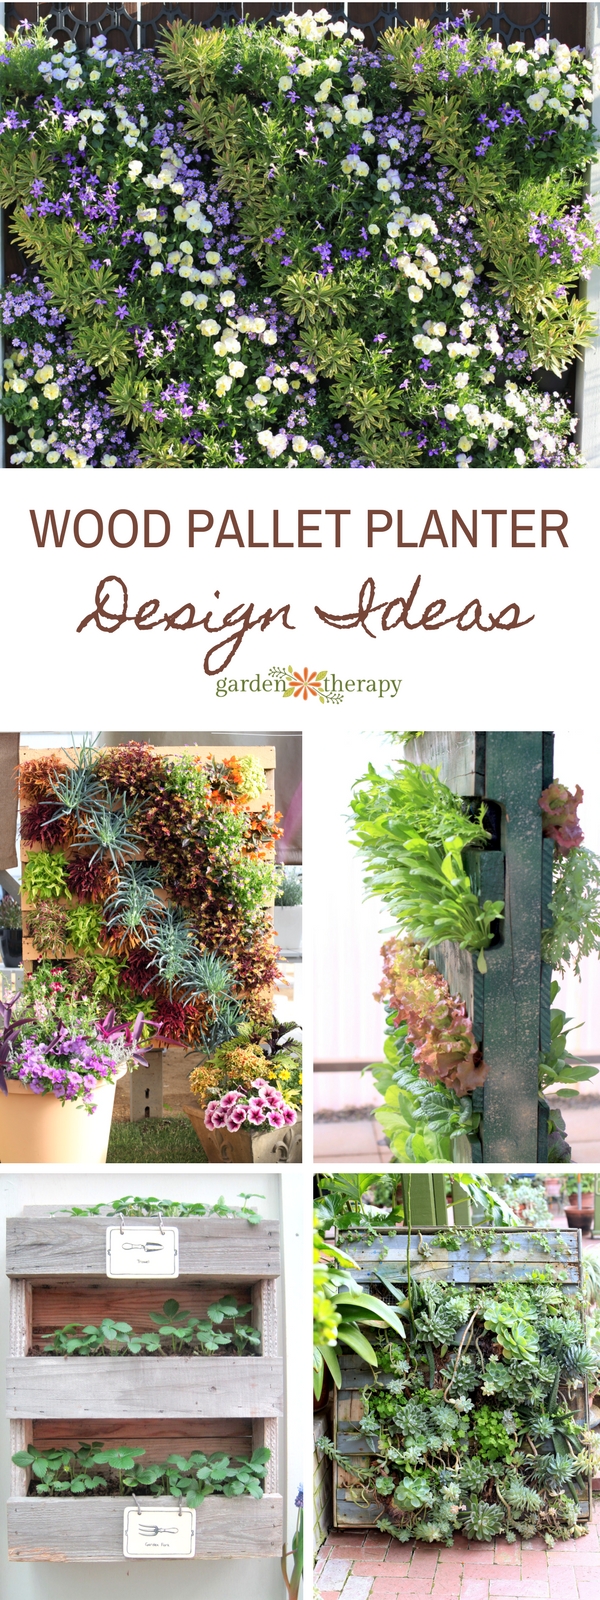 Uses For Wooden Pallets In The Garden